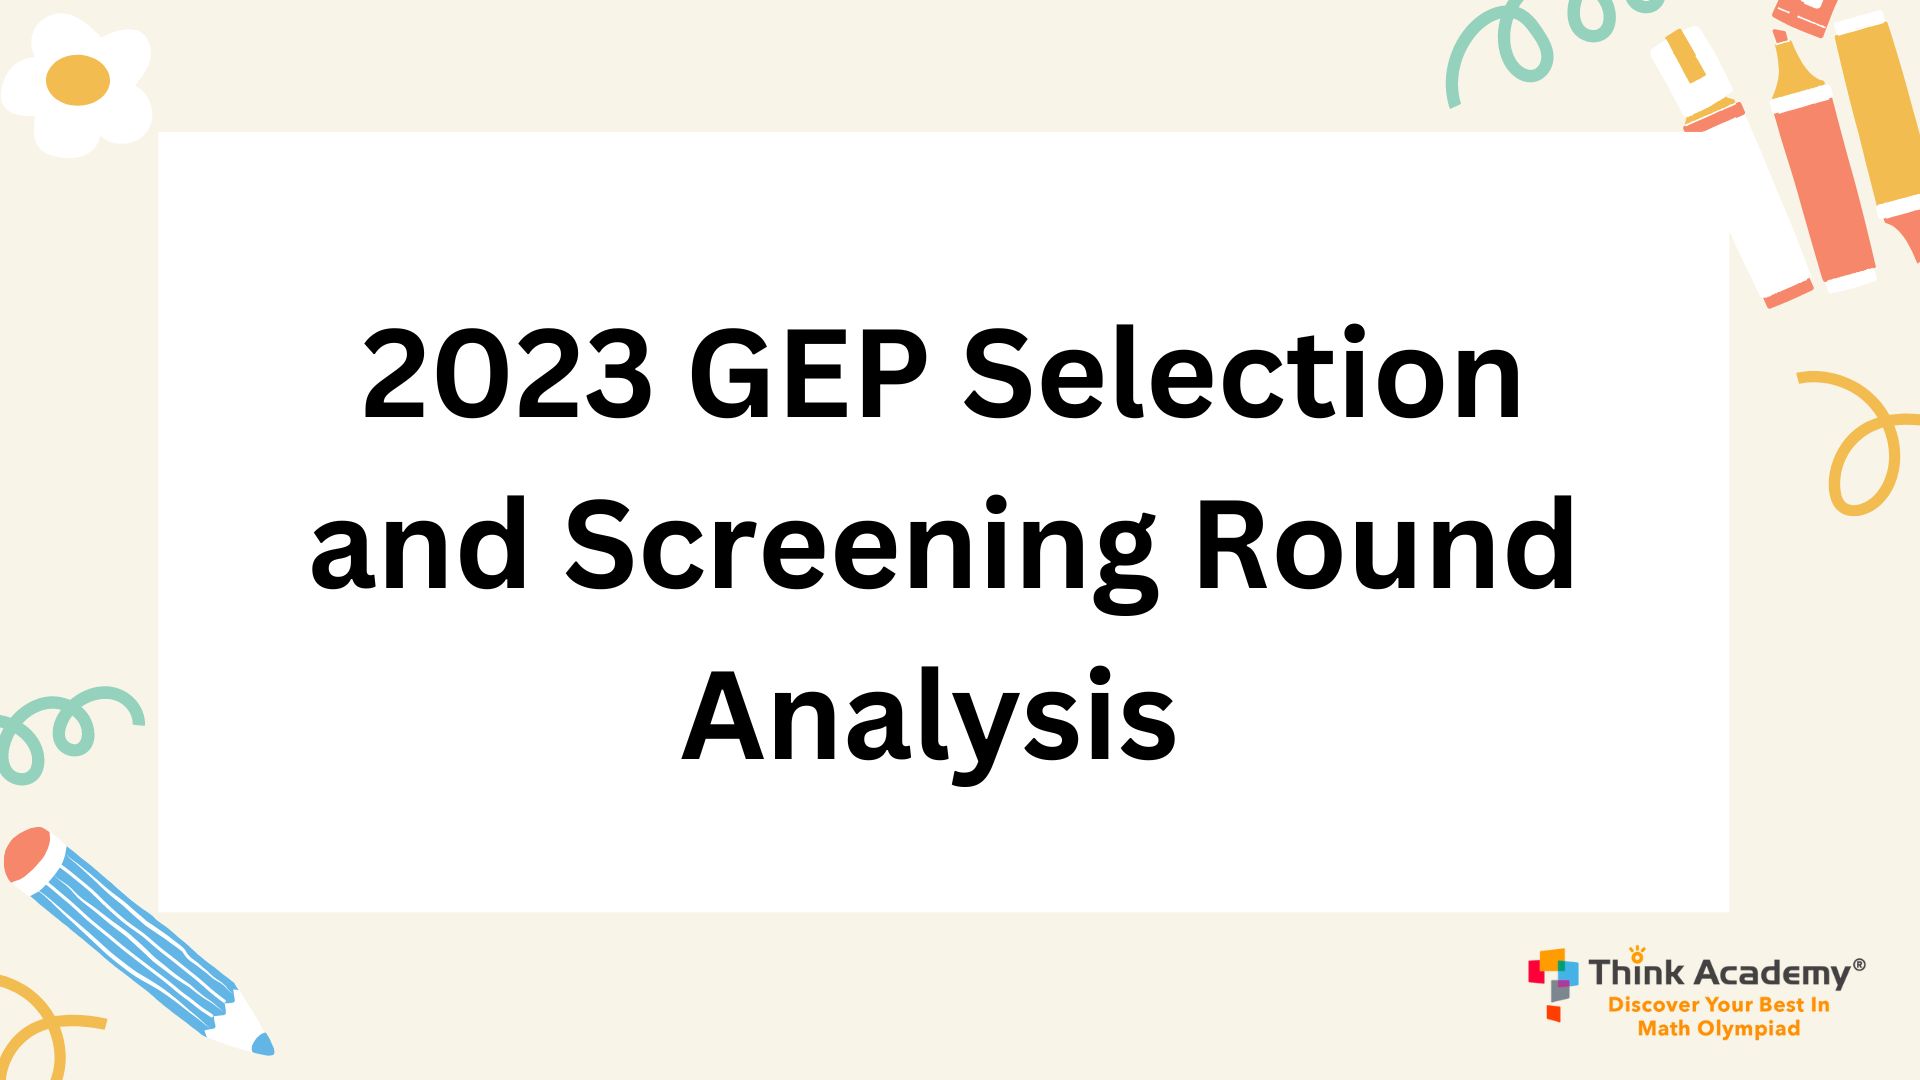 2023 GEP Selection and Screening Round Analysis 